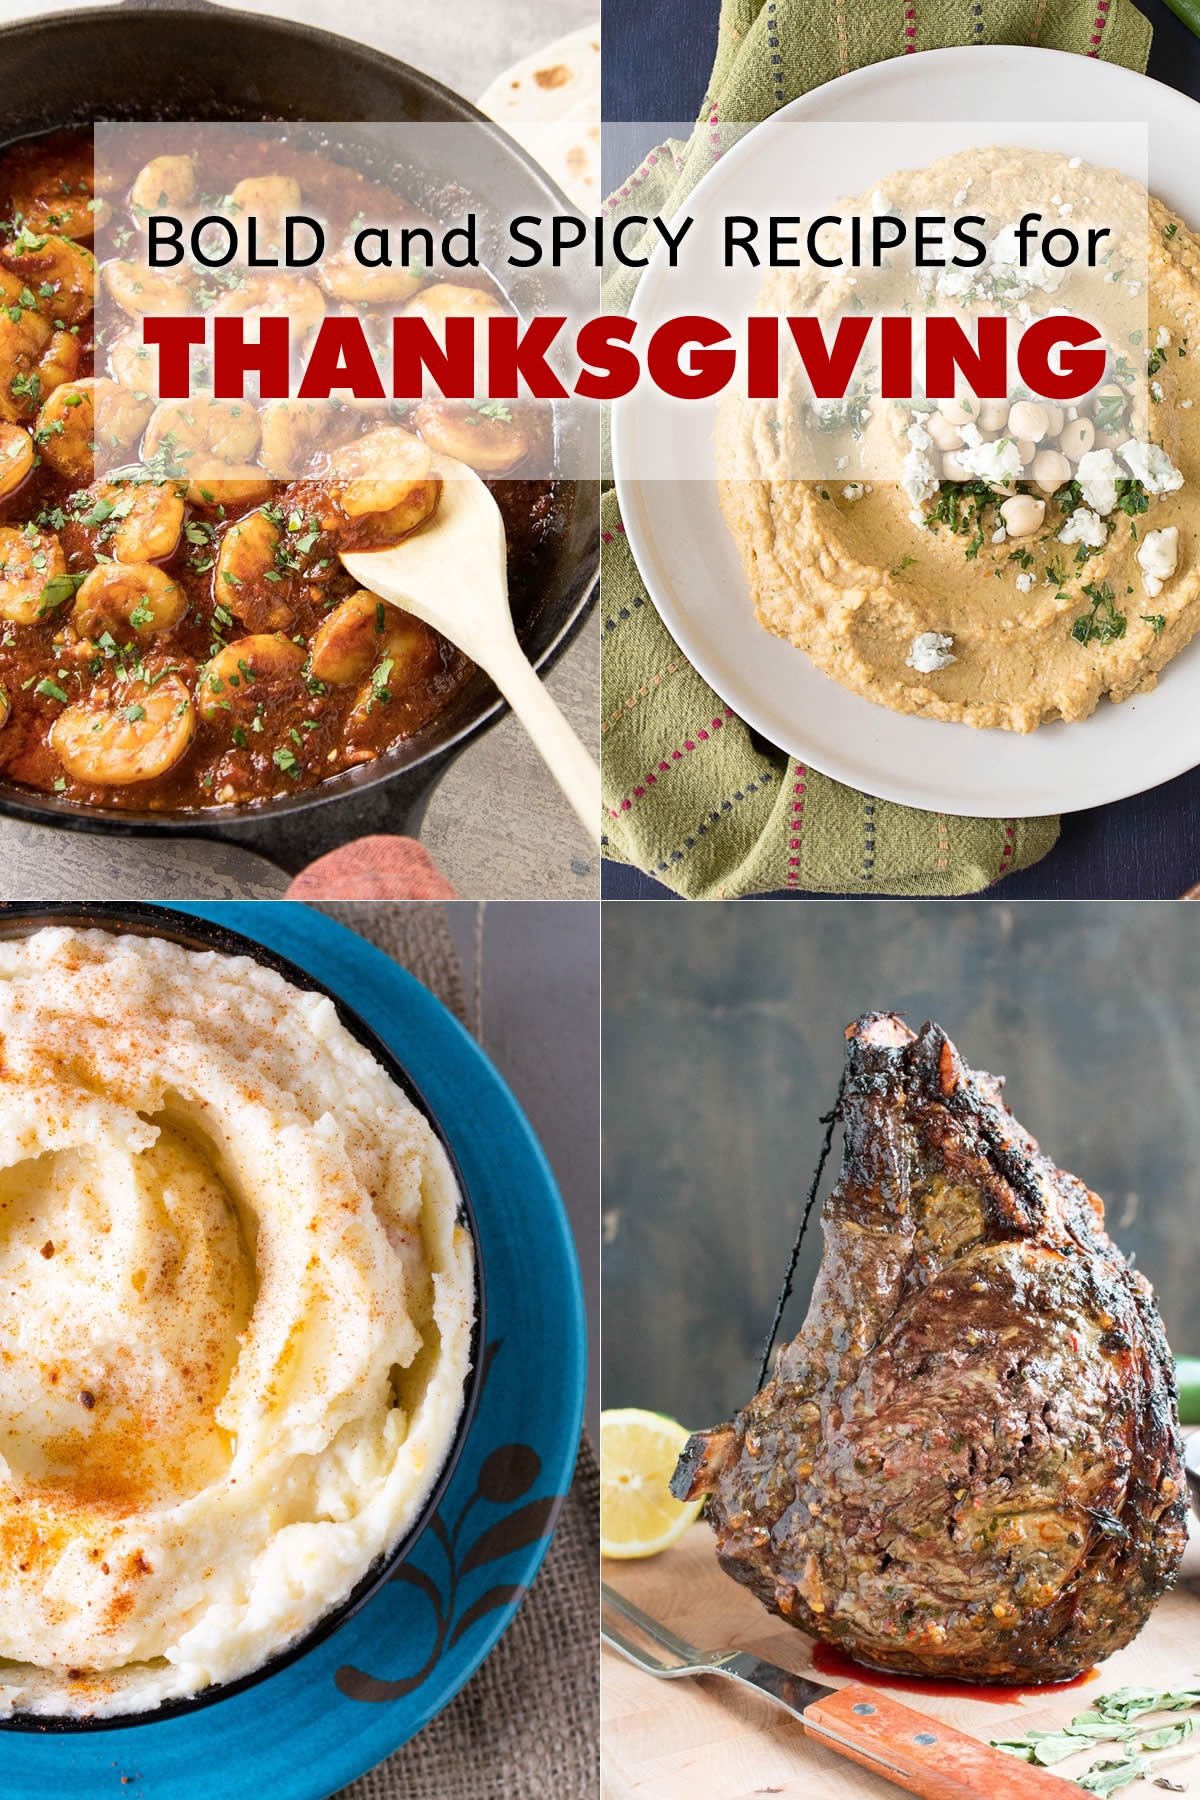 Bold and Spicy Recipes for Thanksgiving